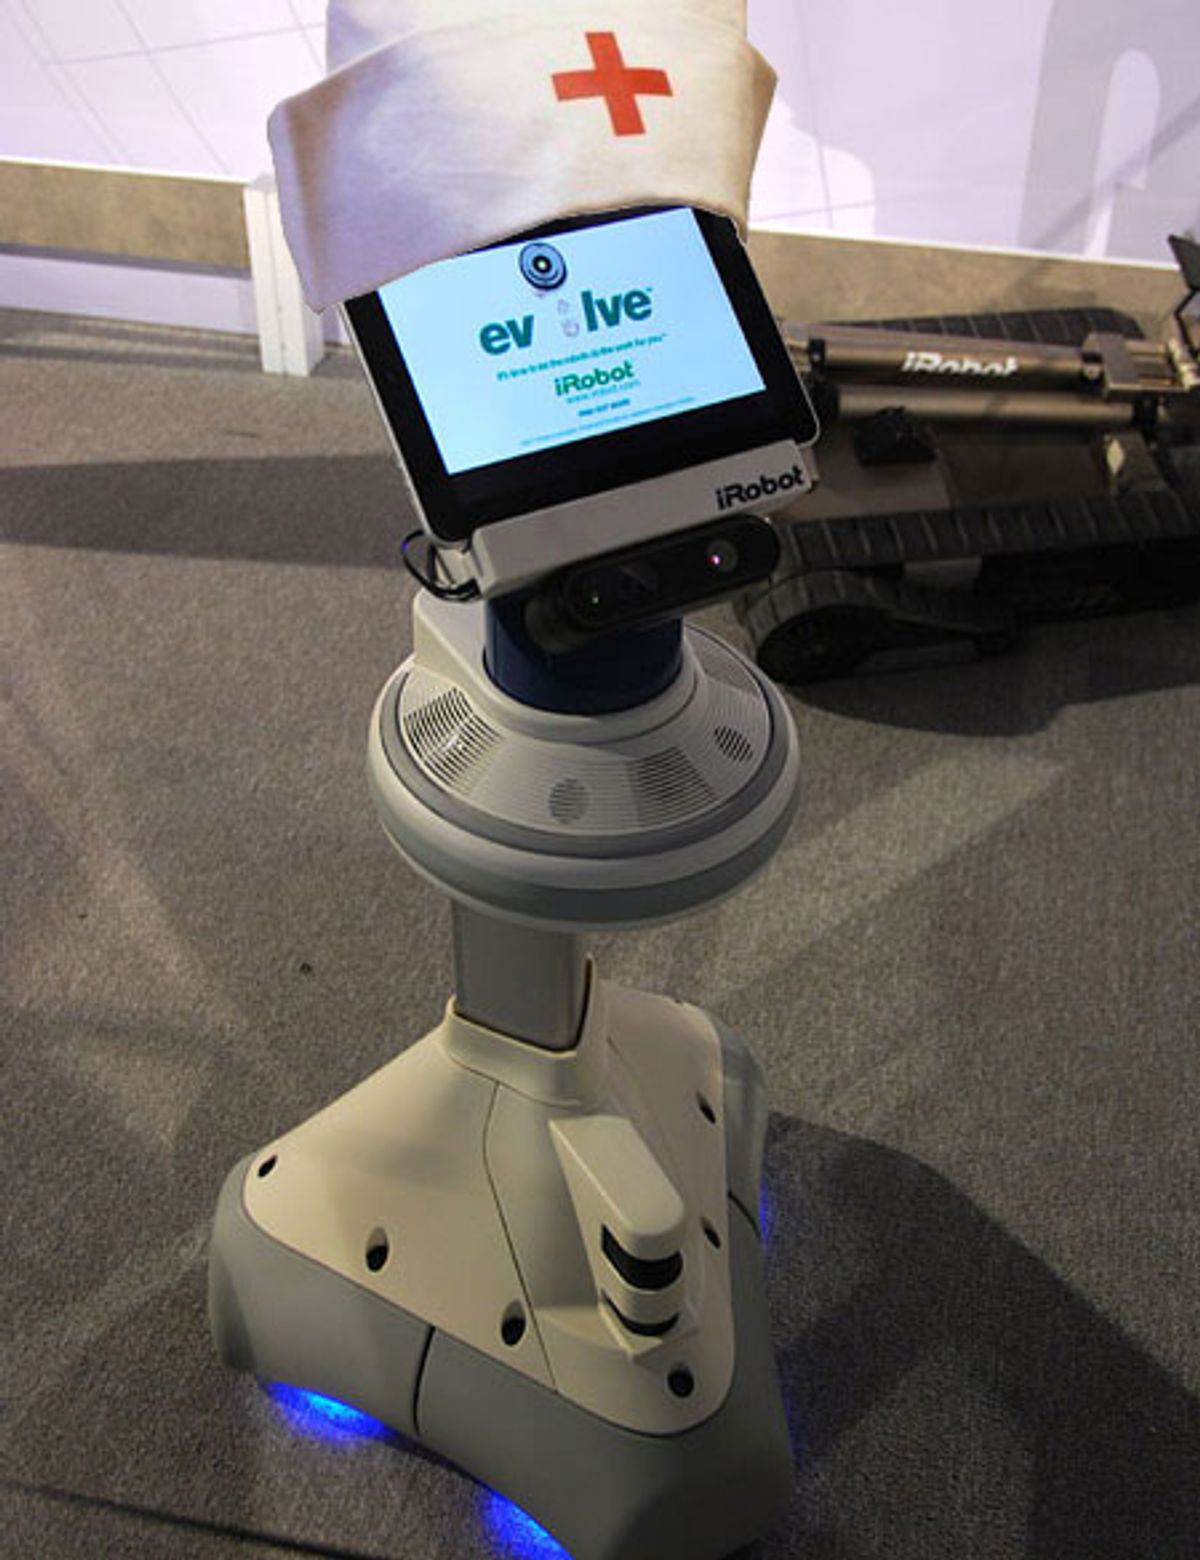 iRobot Partners With InTouch, Ava to Start Caring About Your Health